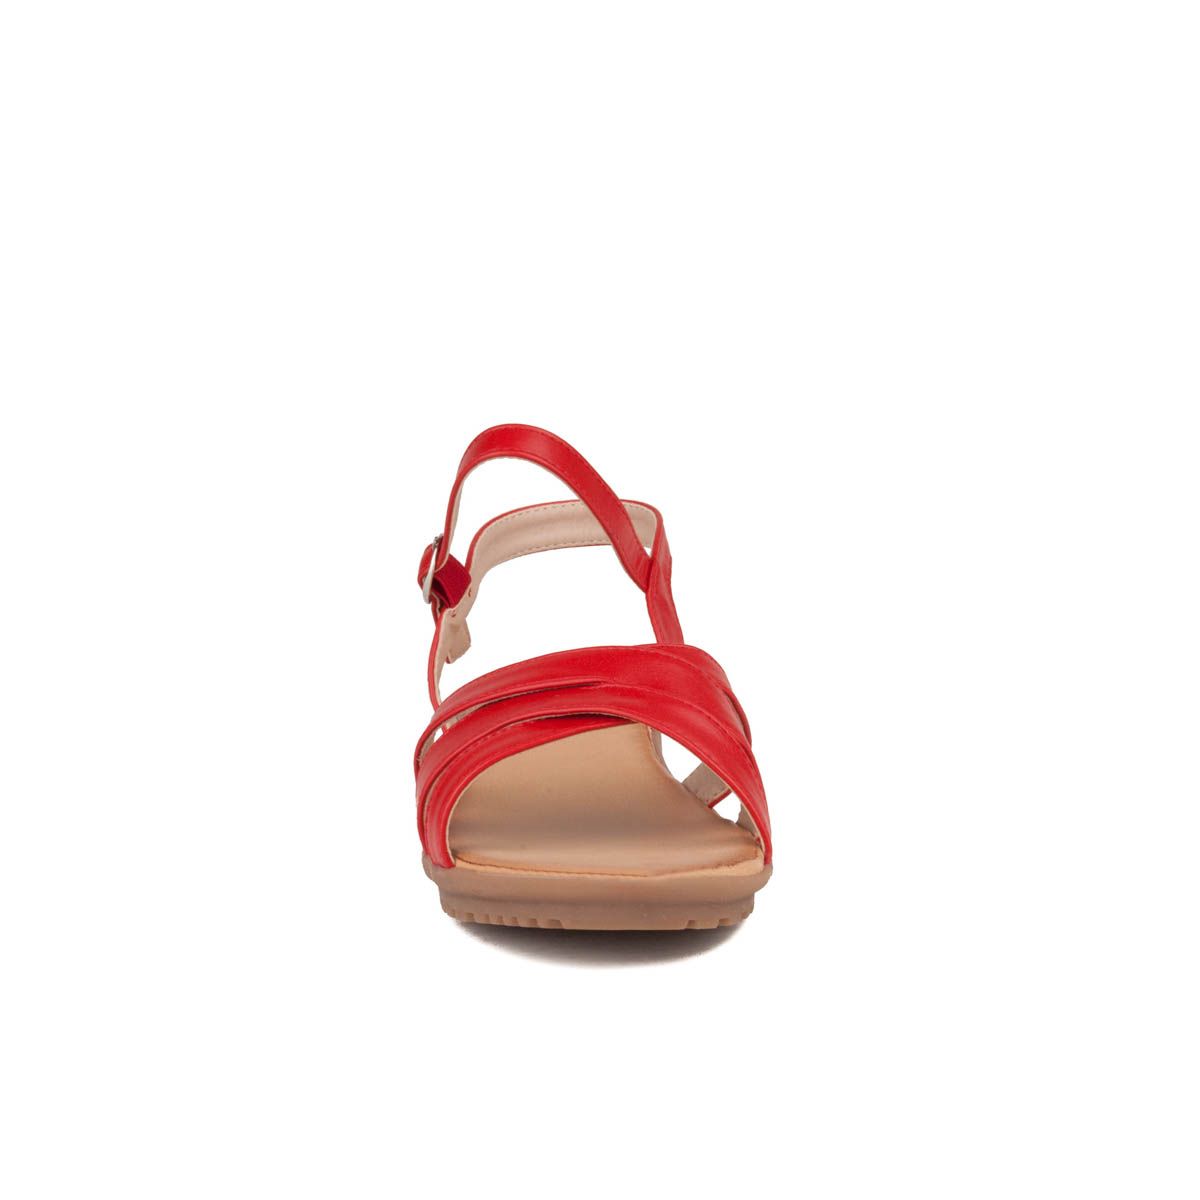 The comeding is a basic but perfect sandala for the day by day thanks to its comfort and low wedge. Manufactured in easy-to-clean material and with padded template. Adjust perfectly thanks to its buckle and elastic closure. Height heel 3 cm and wedge of 1.5 cm.